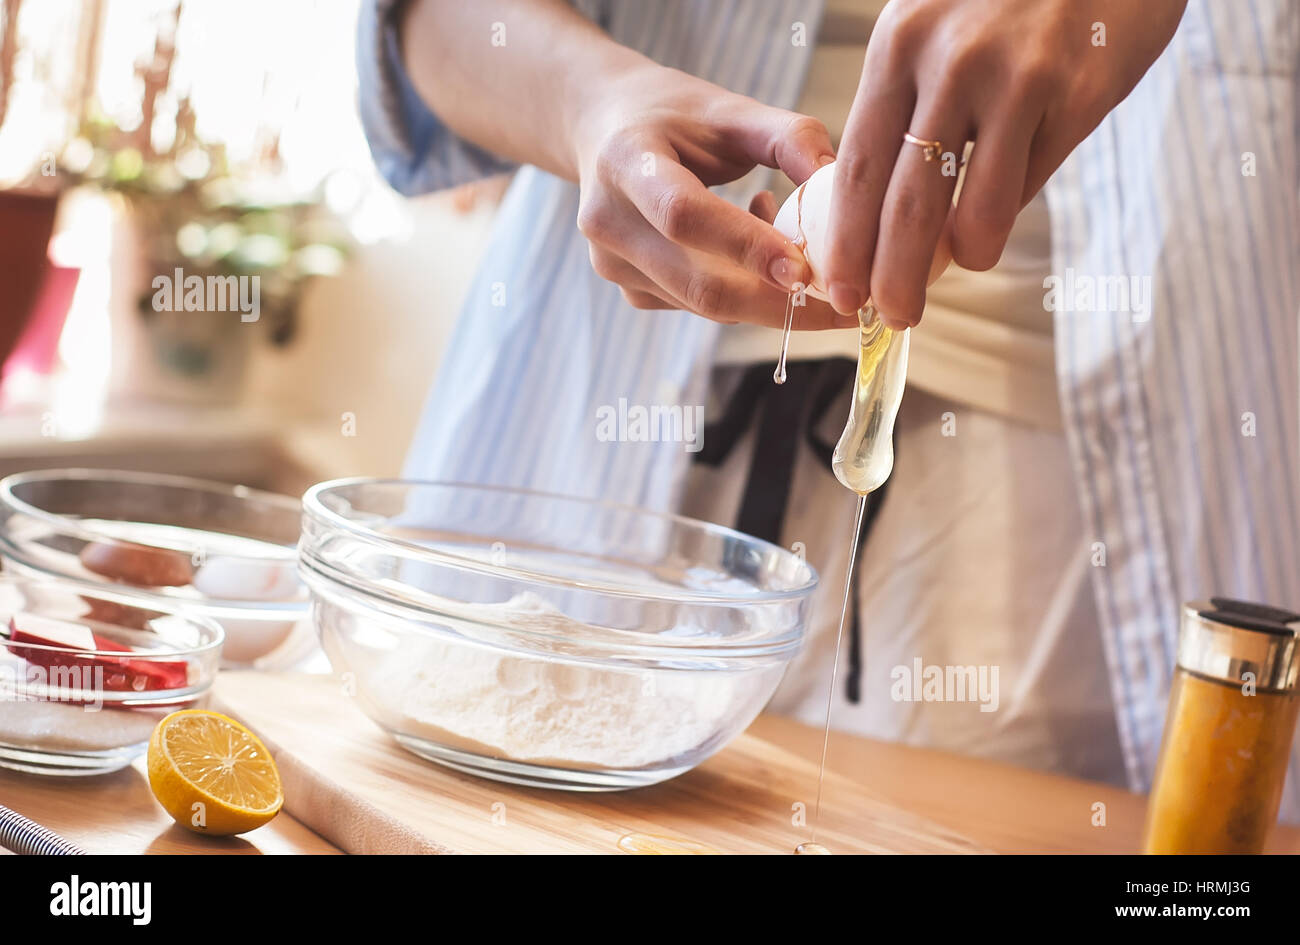 Bad cooking, kitchen disasters, spilled egg Stock Photo